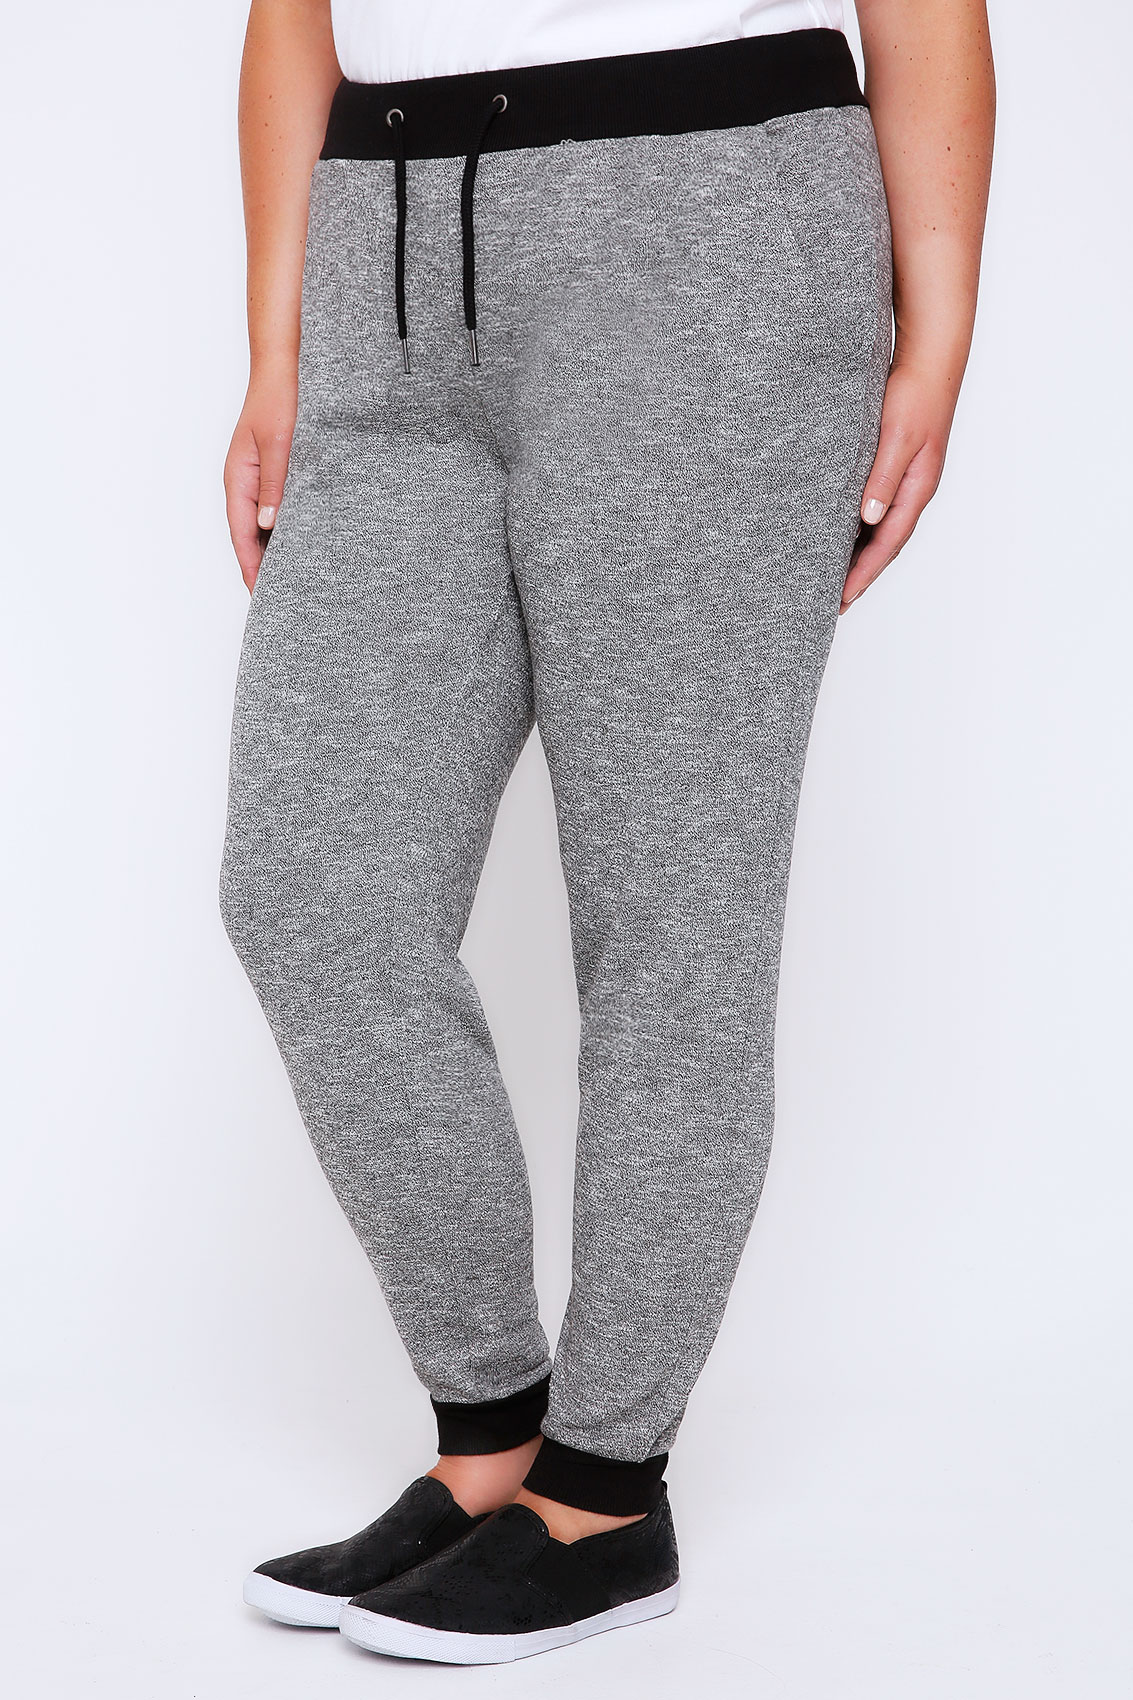 Charcoal Joggers With Black Contrast Cuff Plus Size 16 to 32